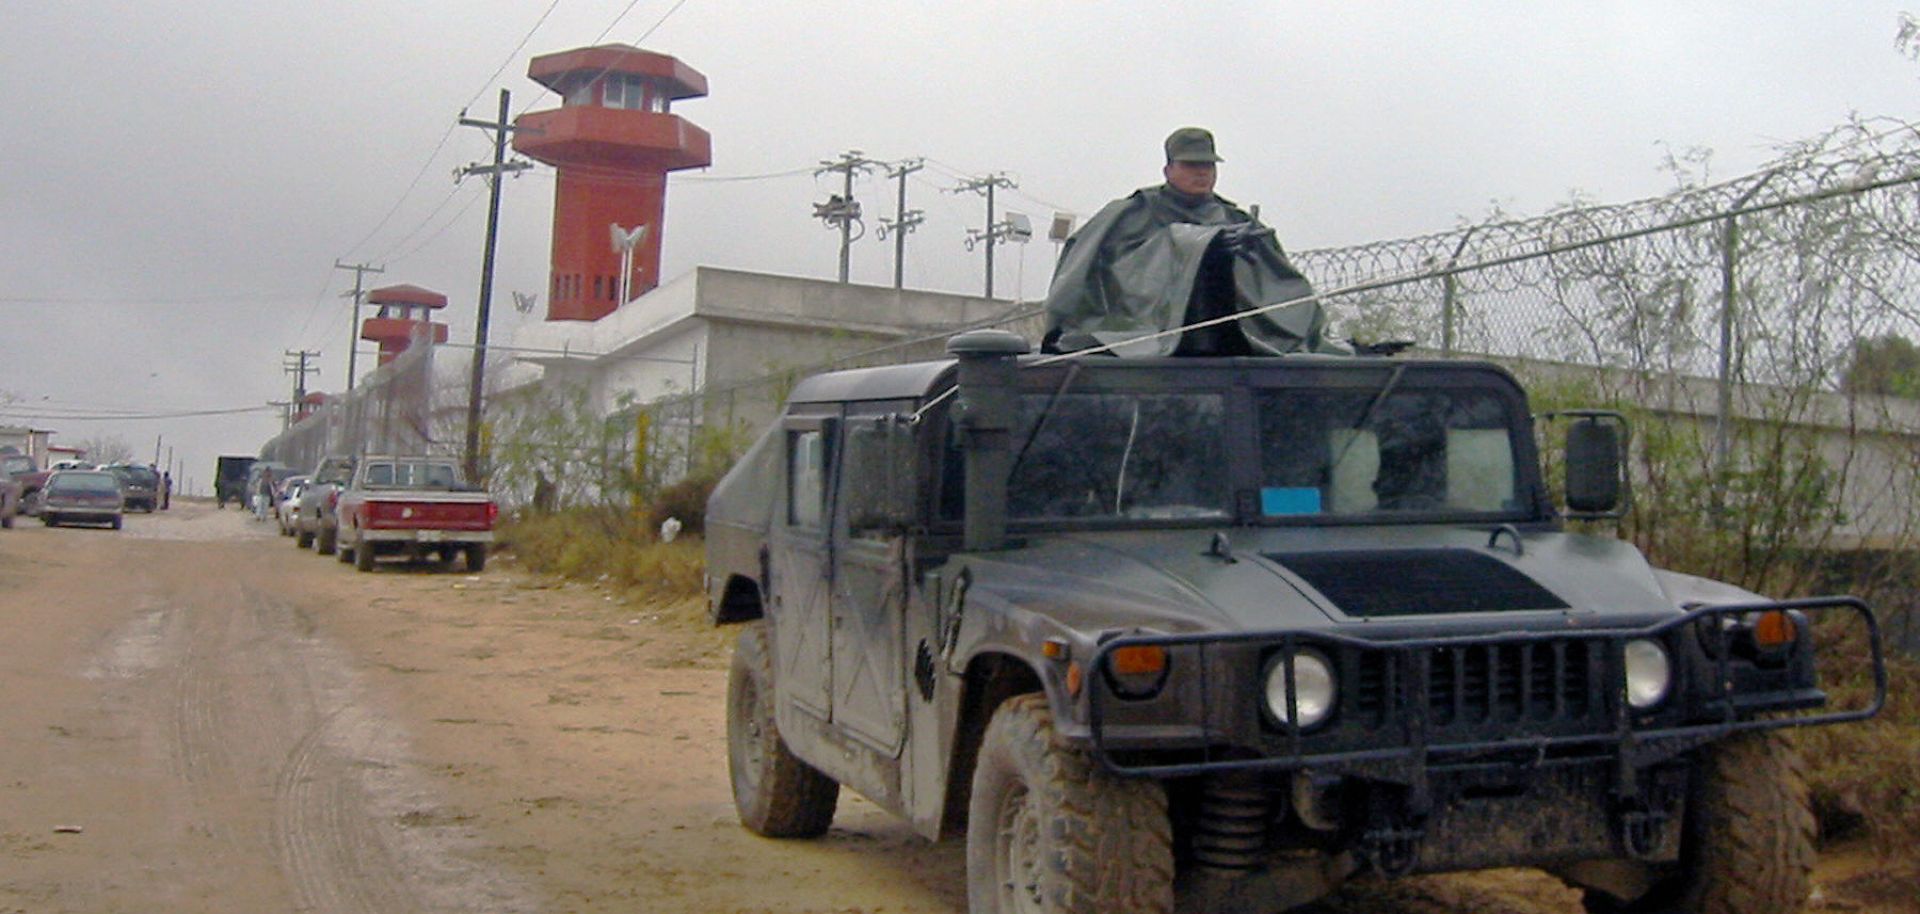 More than 100 Mexican military and police forces guard a prison in Nuevo Laredo during a security task to conduct a search operation inside the institution for arms, drug and other unauthorized items on Jan. 31, 2005.